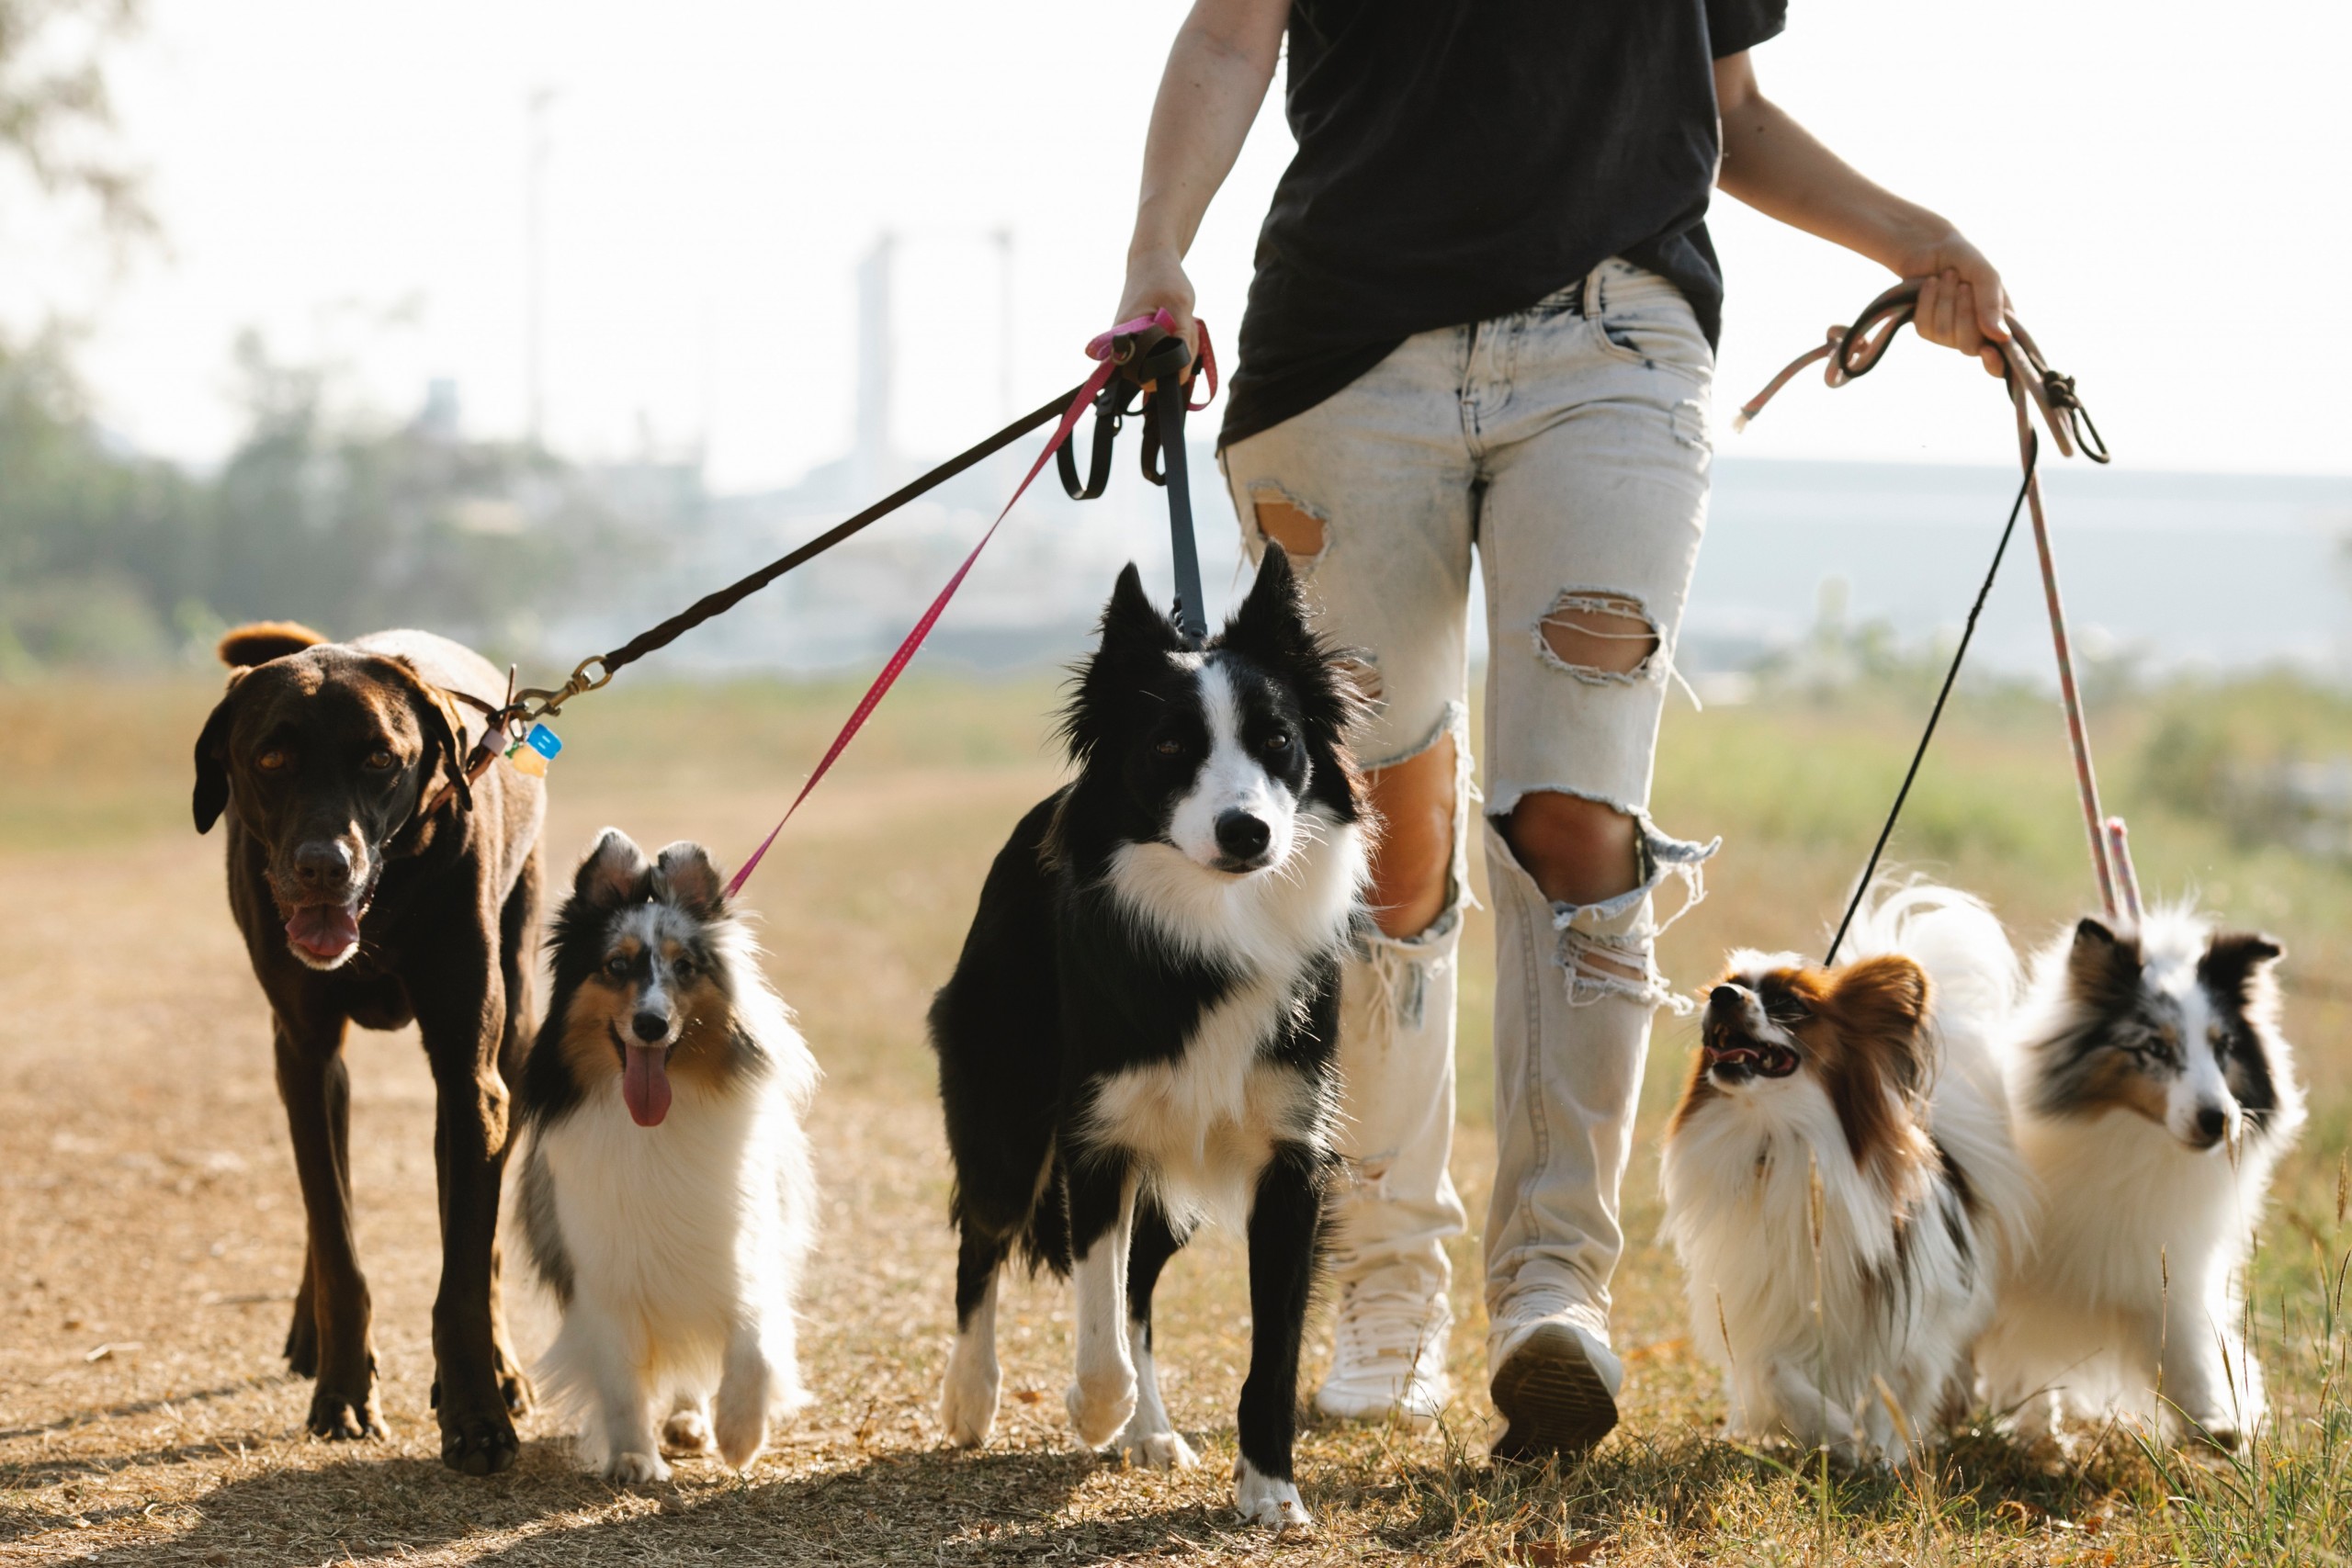 Selecting a Professional Dog Walker